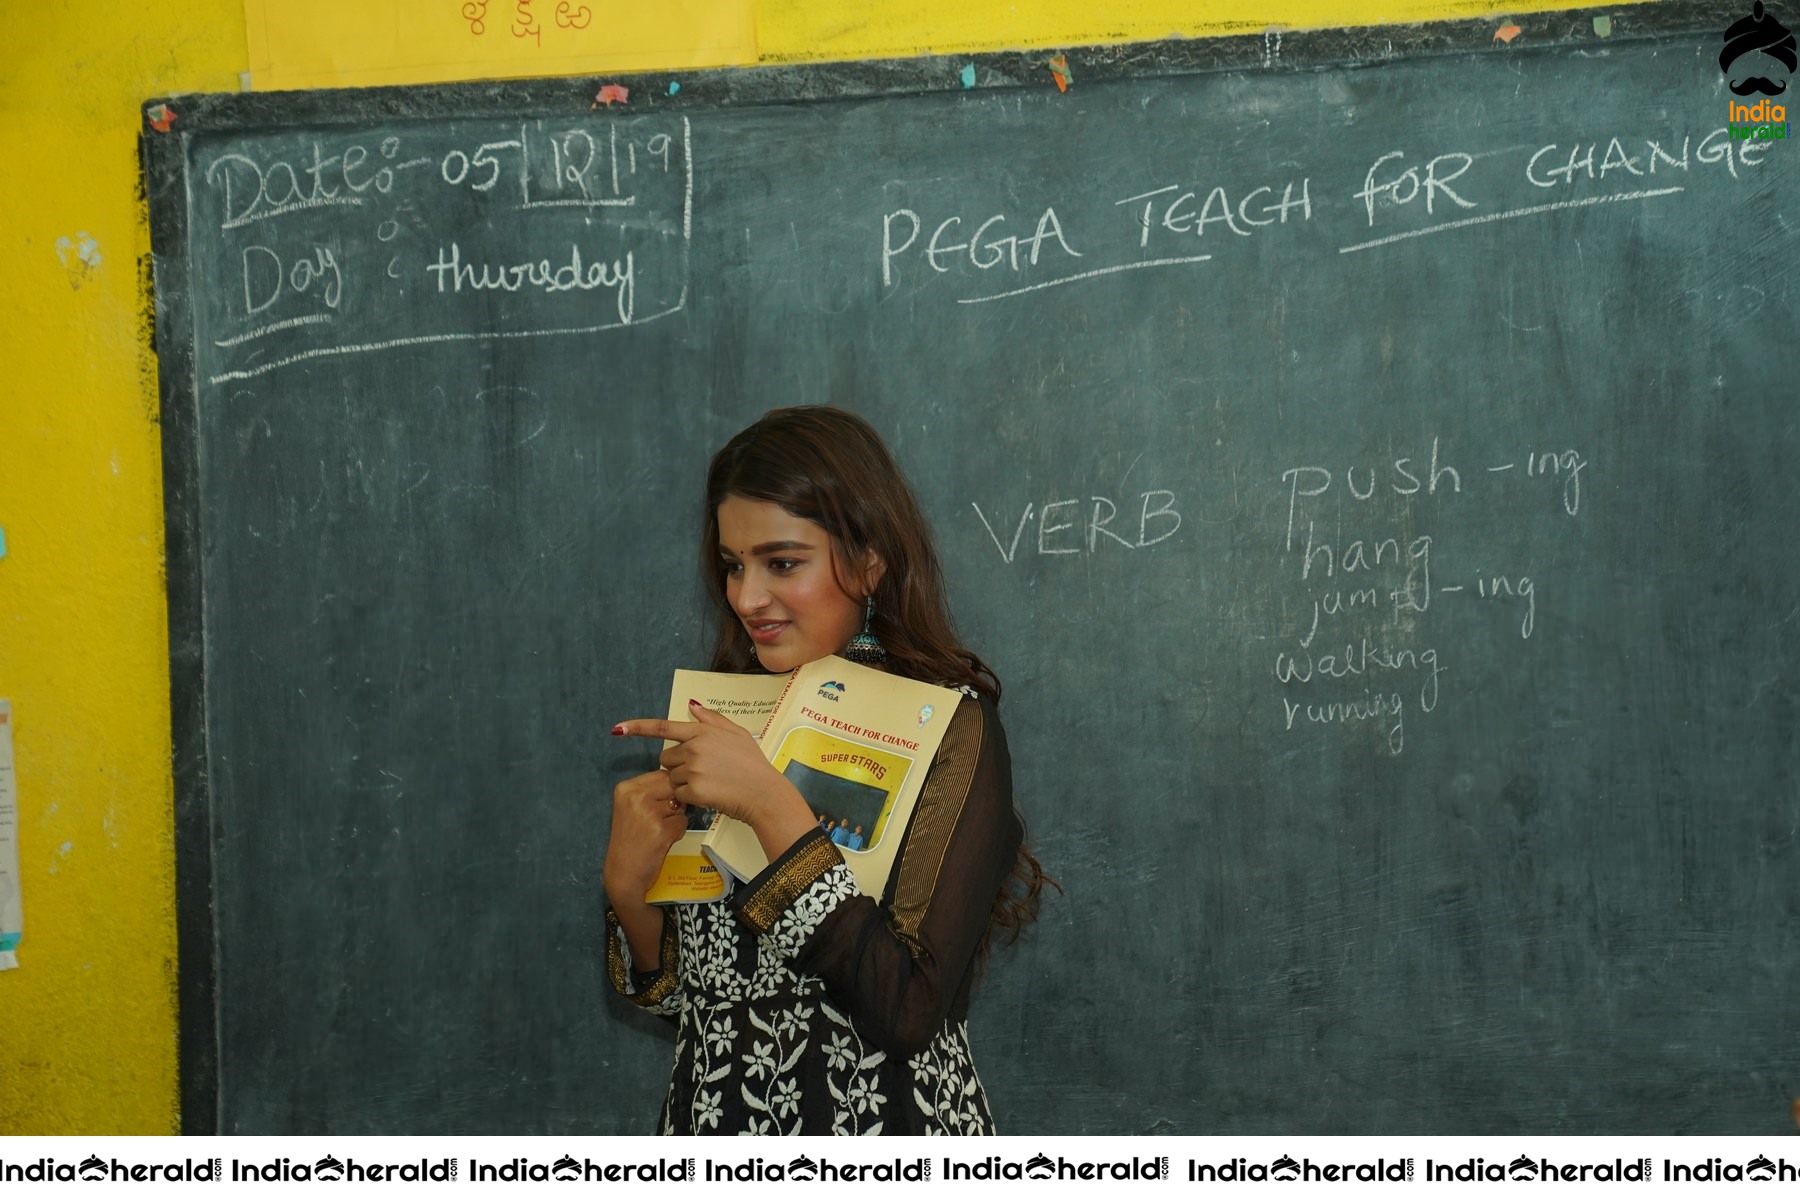 Nidhhi Agerwal Teaches English To Pega Teach For Change Supported Kids Set 2